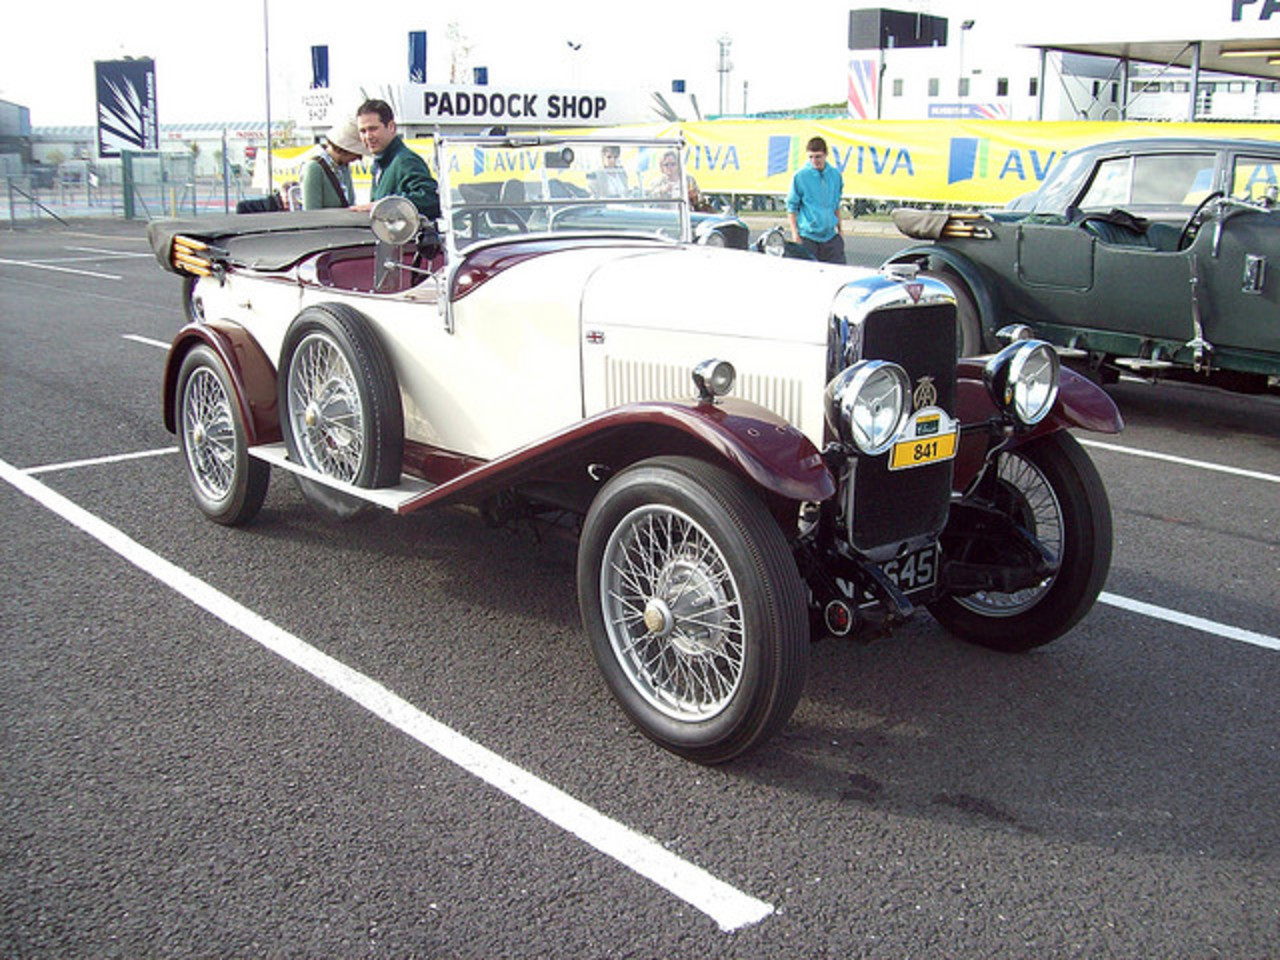 Alvis 1250 TJ Sports Photo Gallery: Photo #04 out of 8, Image Size ...